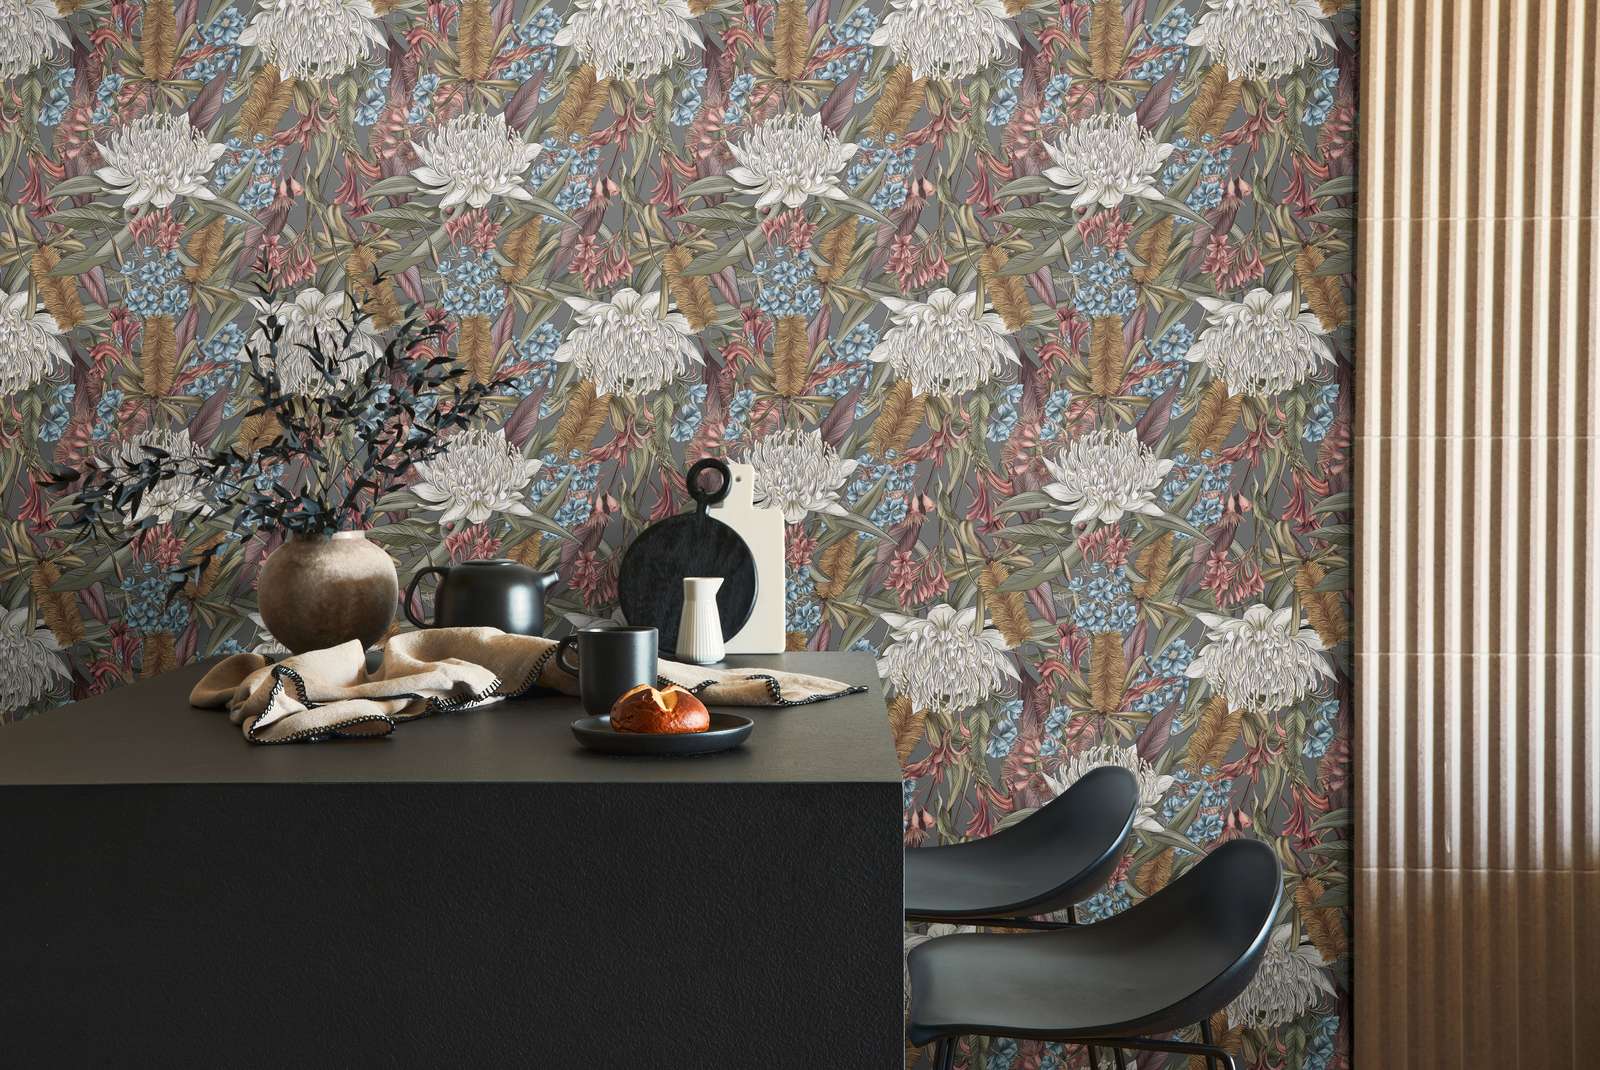             Jungle wallpaper floral with leaves & flowers textured matt - grey, pink, green
        